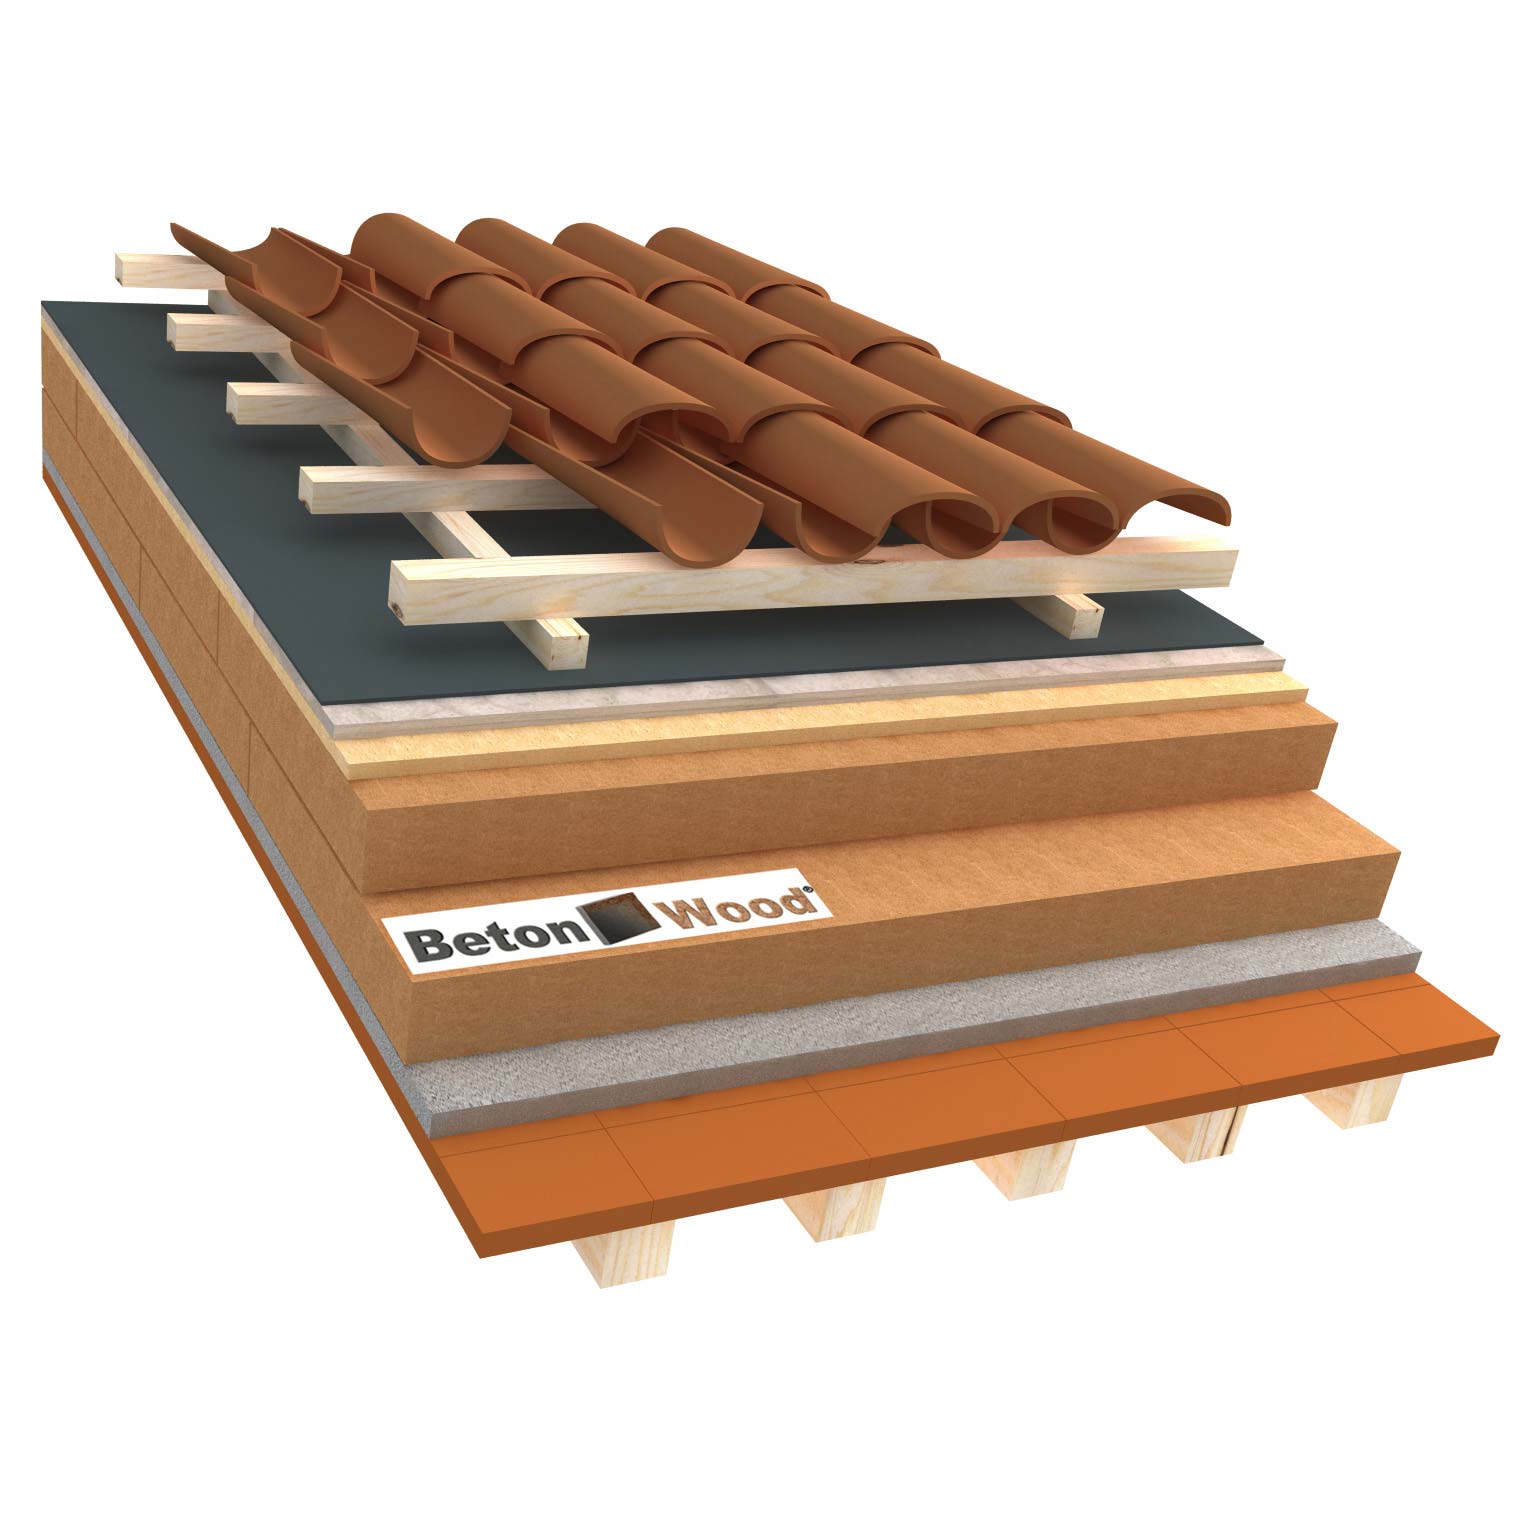 Ventilated roof with wood fiber Isorel, Special dry and cement bonded particle boards on terracotta tiles